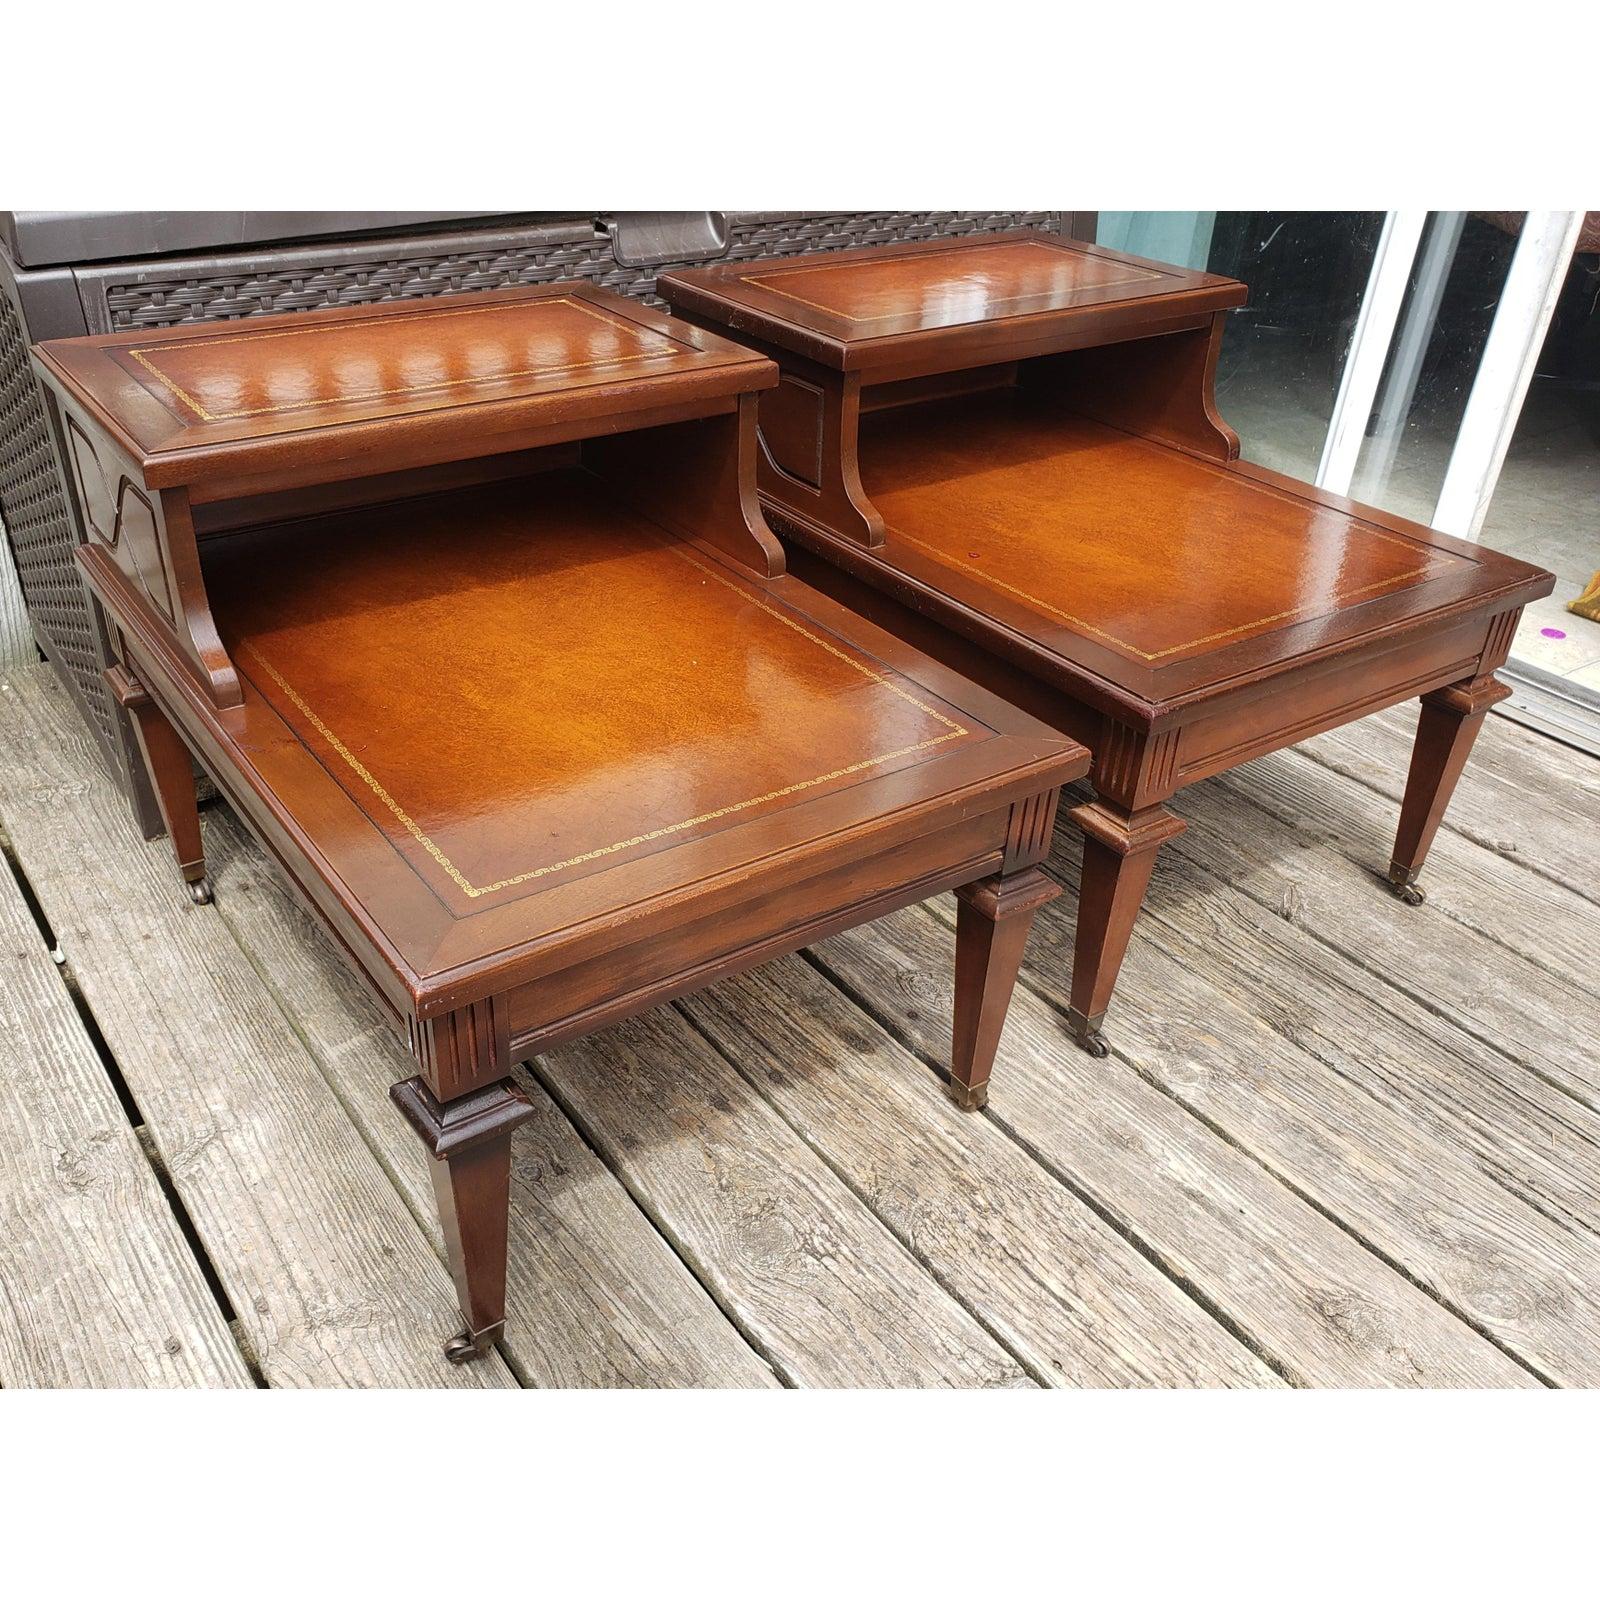 Mersman vintage two tier mahogany with leather top insert. Leather top insert with gold stenciling is in good condition . The two tier tables measures 19.5